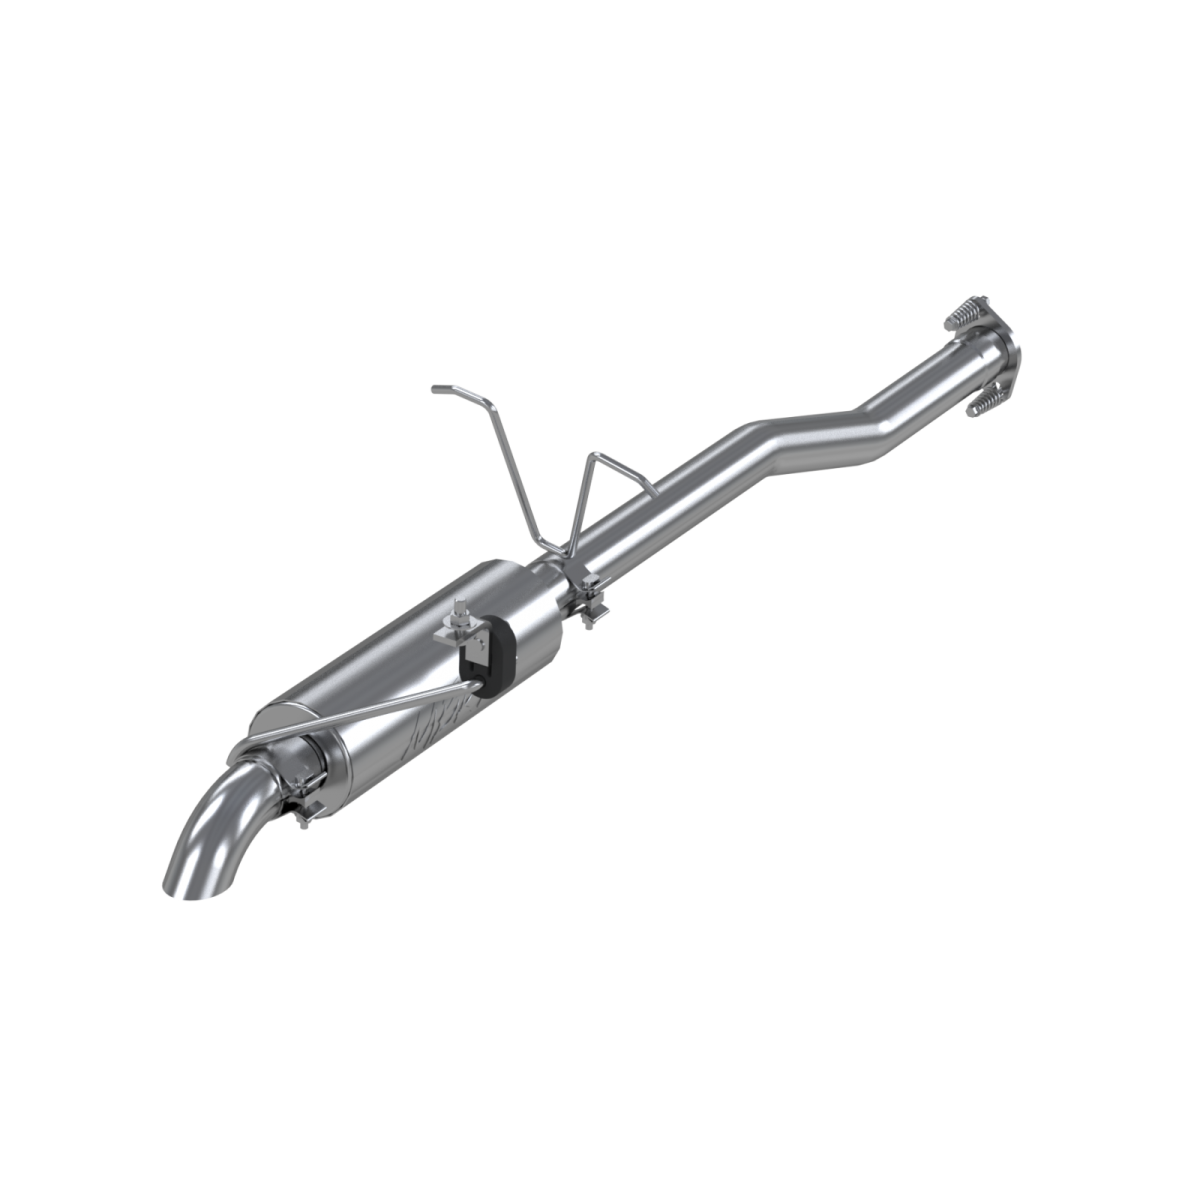 MBRP - MBRP Cat Back Exhaust System Single Turn Down T409 Stainless Steel For 98-11 Ford Ranger 3.0/4.0L S5224409